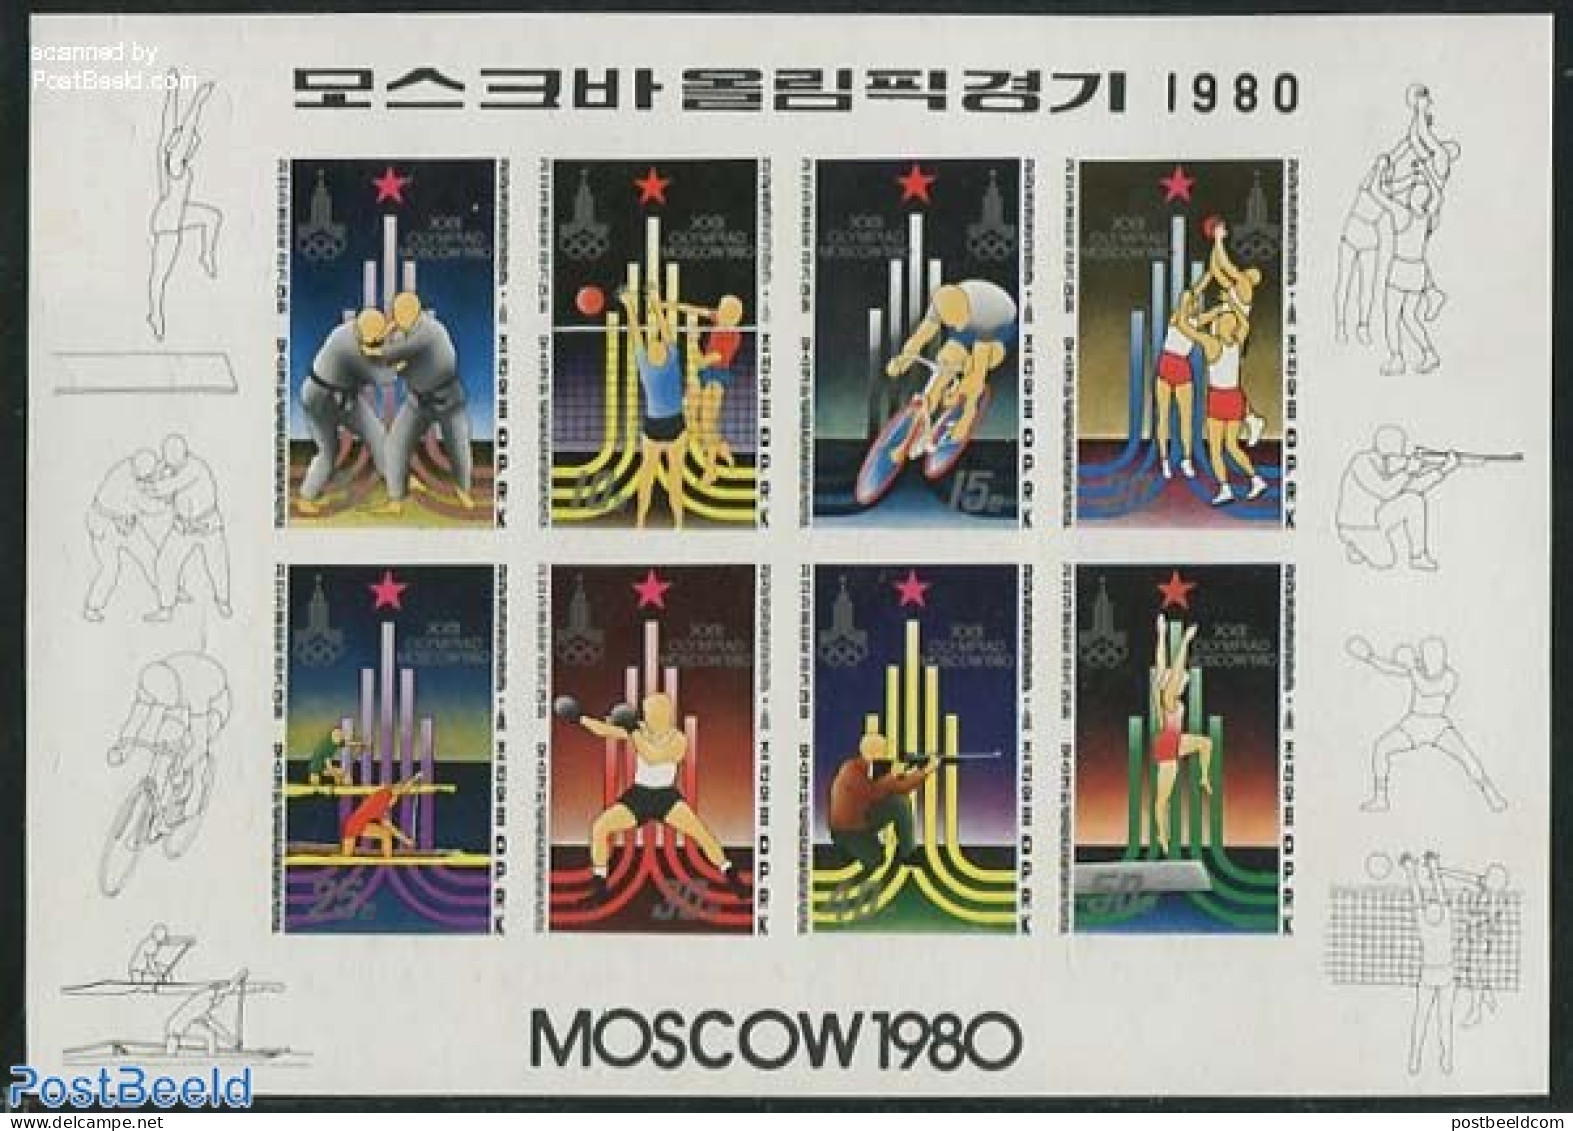 Korea, North 1979 Olympic Games 8v M/s Imperforated, Mint NH, Sport - Boxing - Cycling - Olympic Games - Shooting Sports - Pugilato